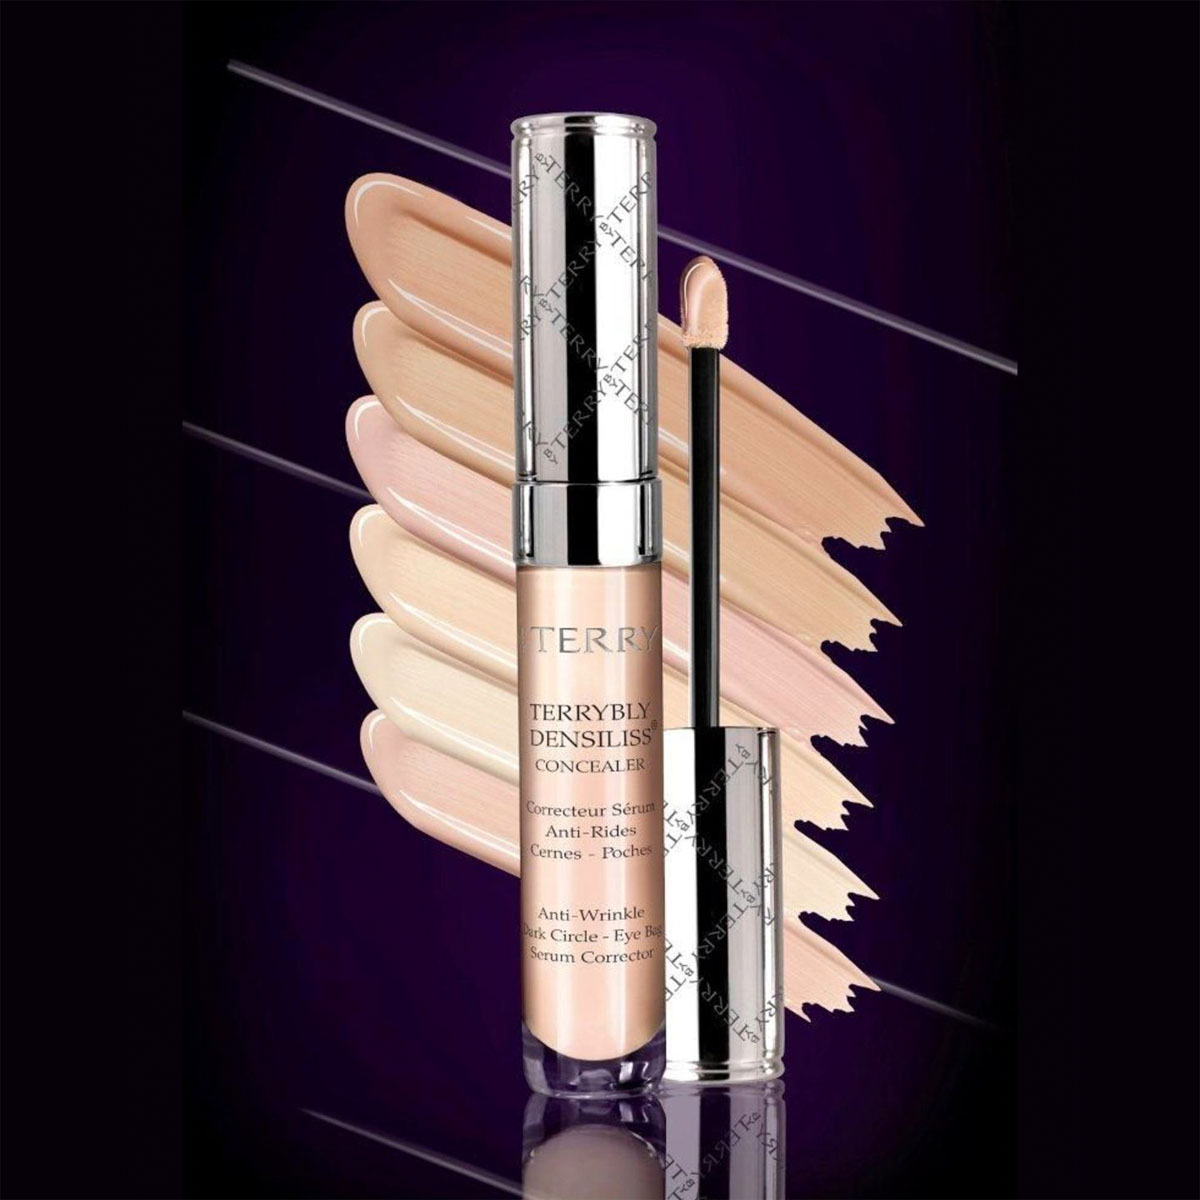 BY TERRY Terrybly Densiliss Concealer Ambient